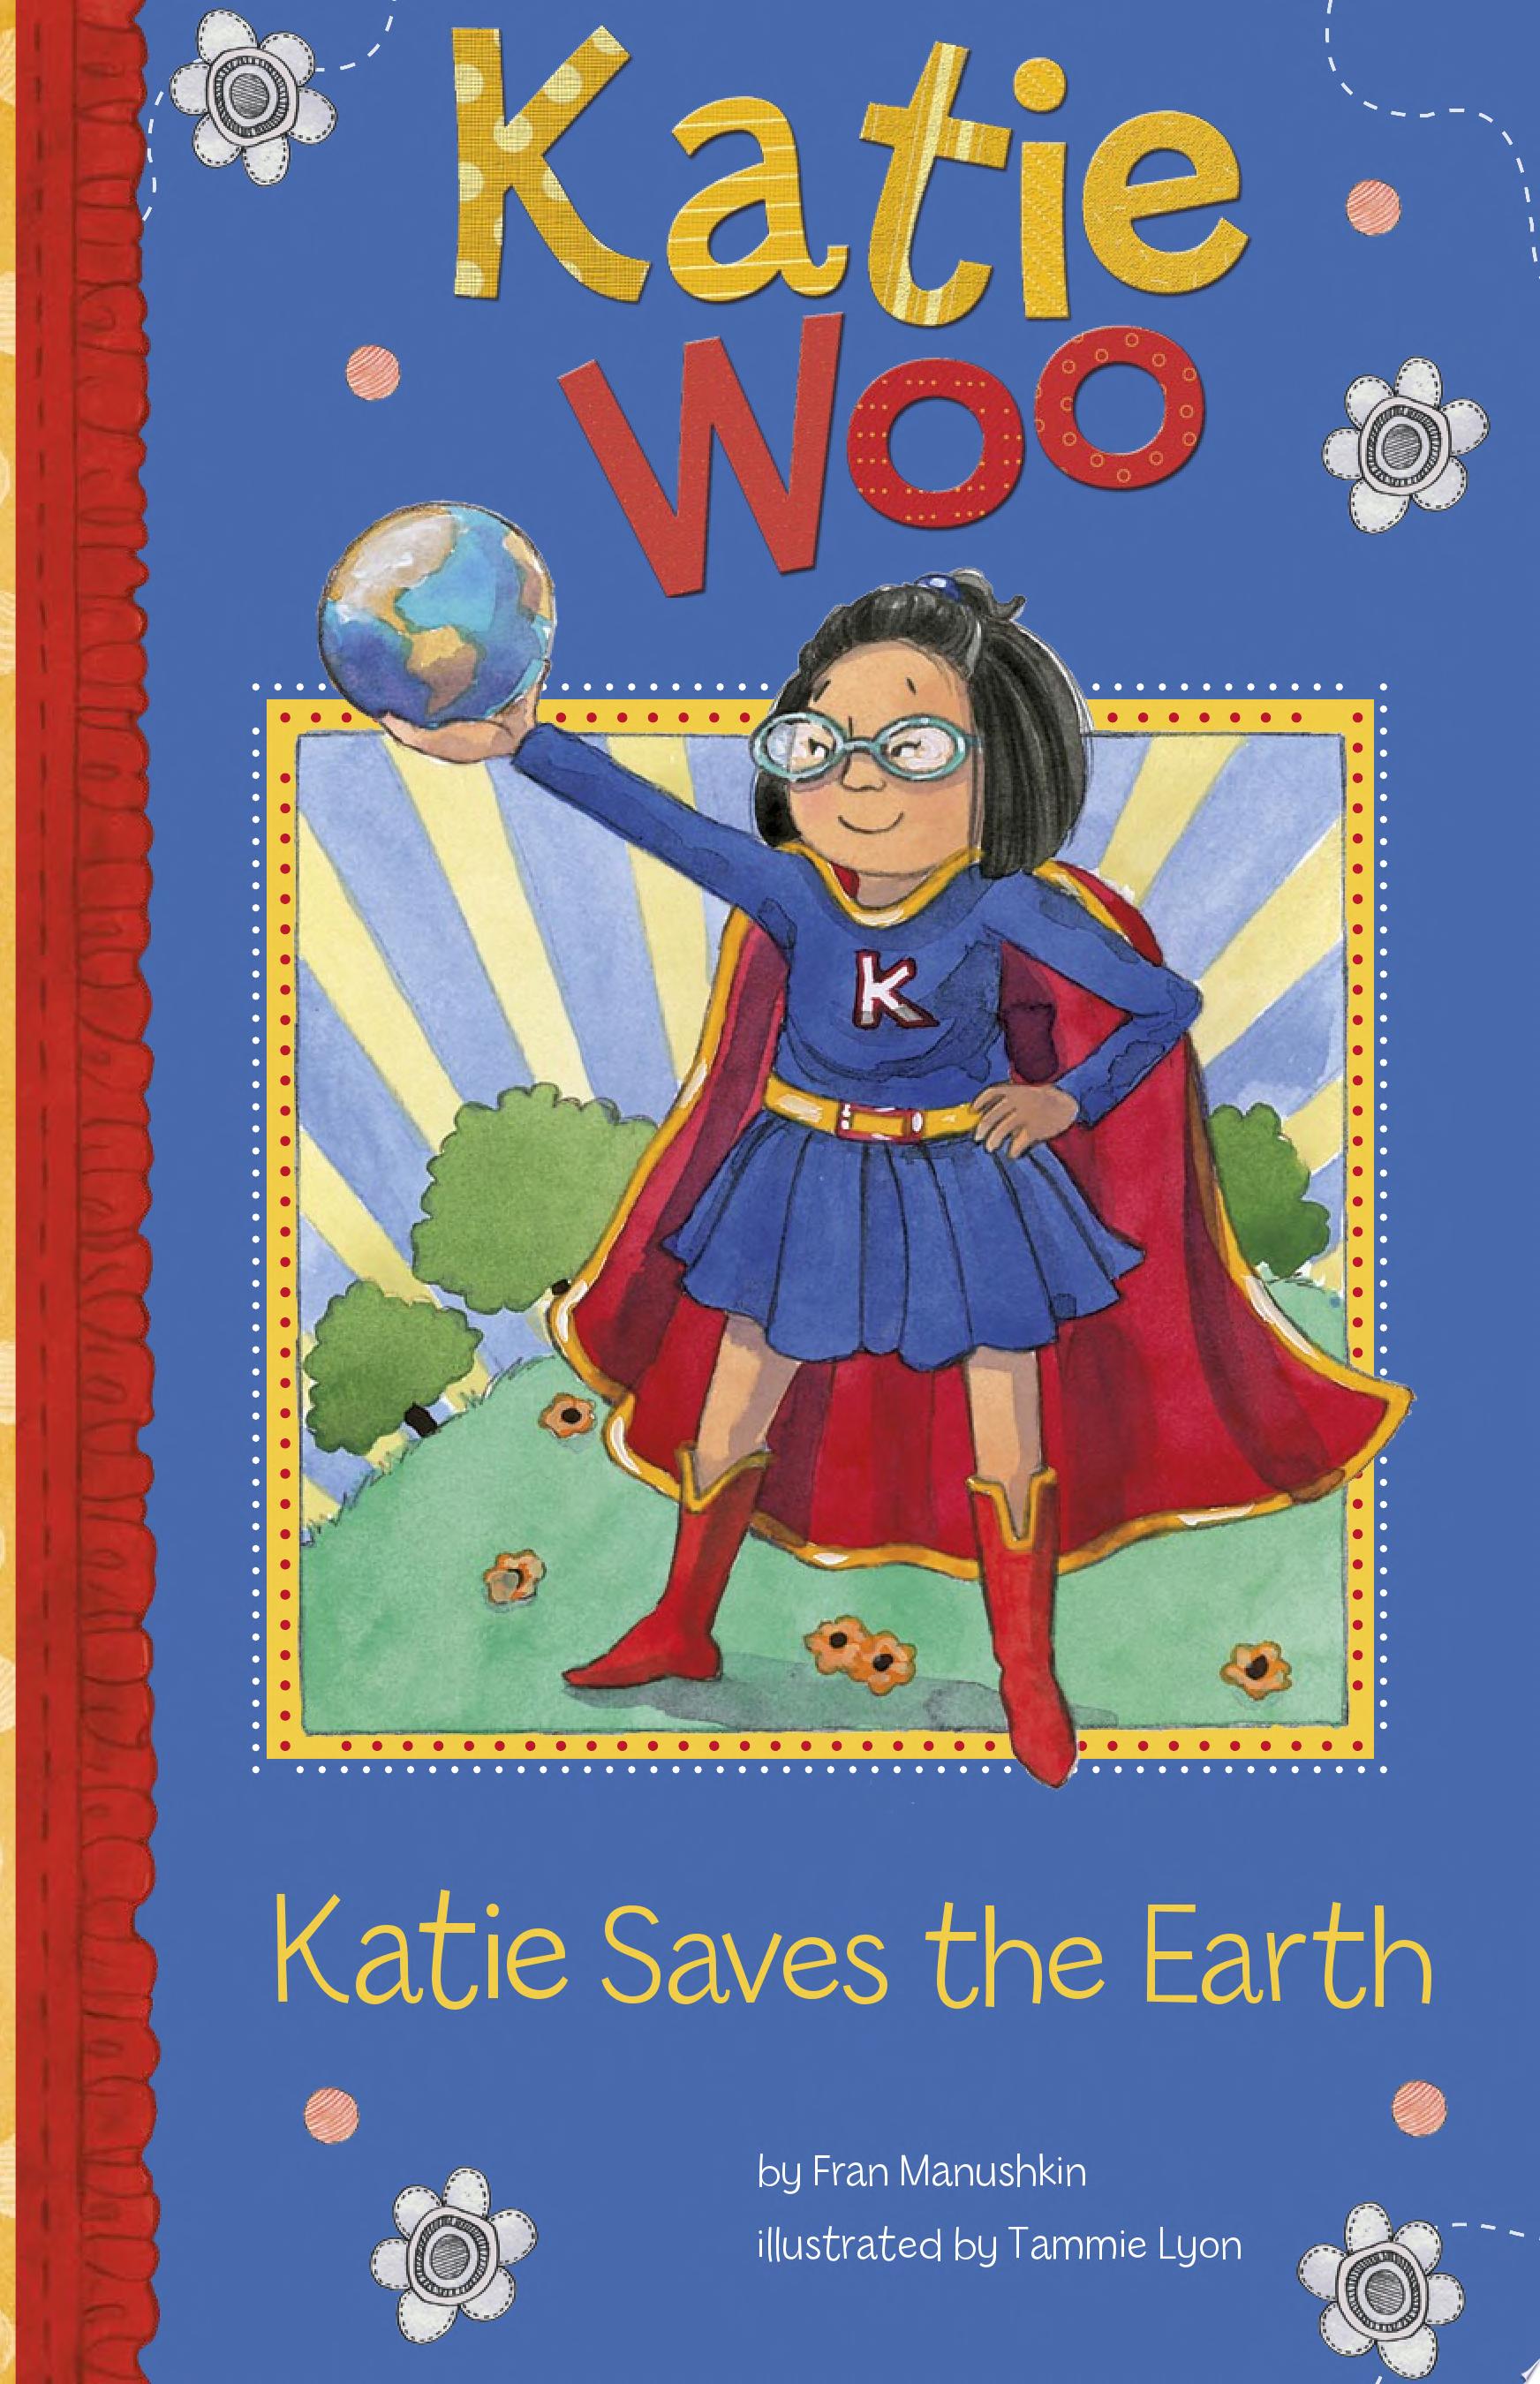 Image for "Katie Woo: Katie Saves the Earth"